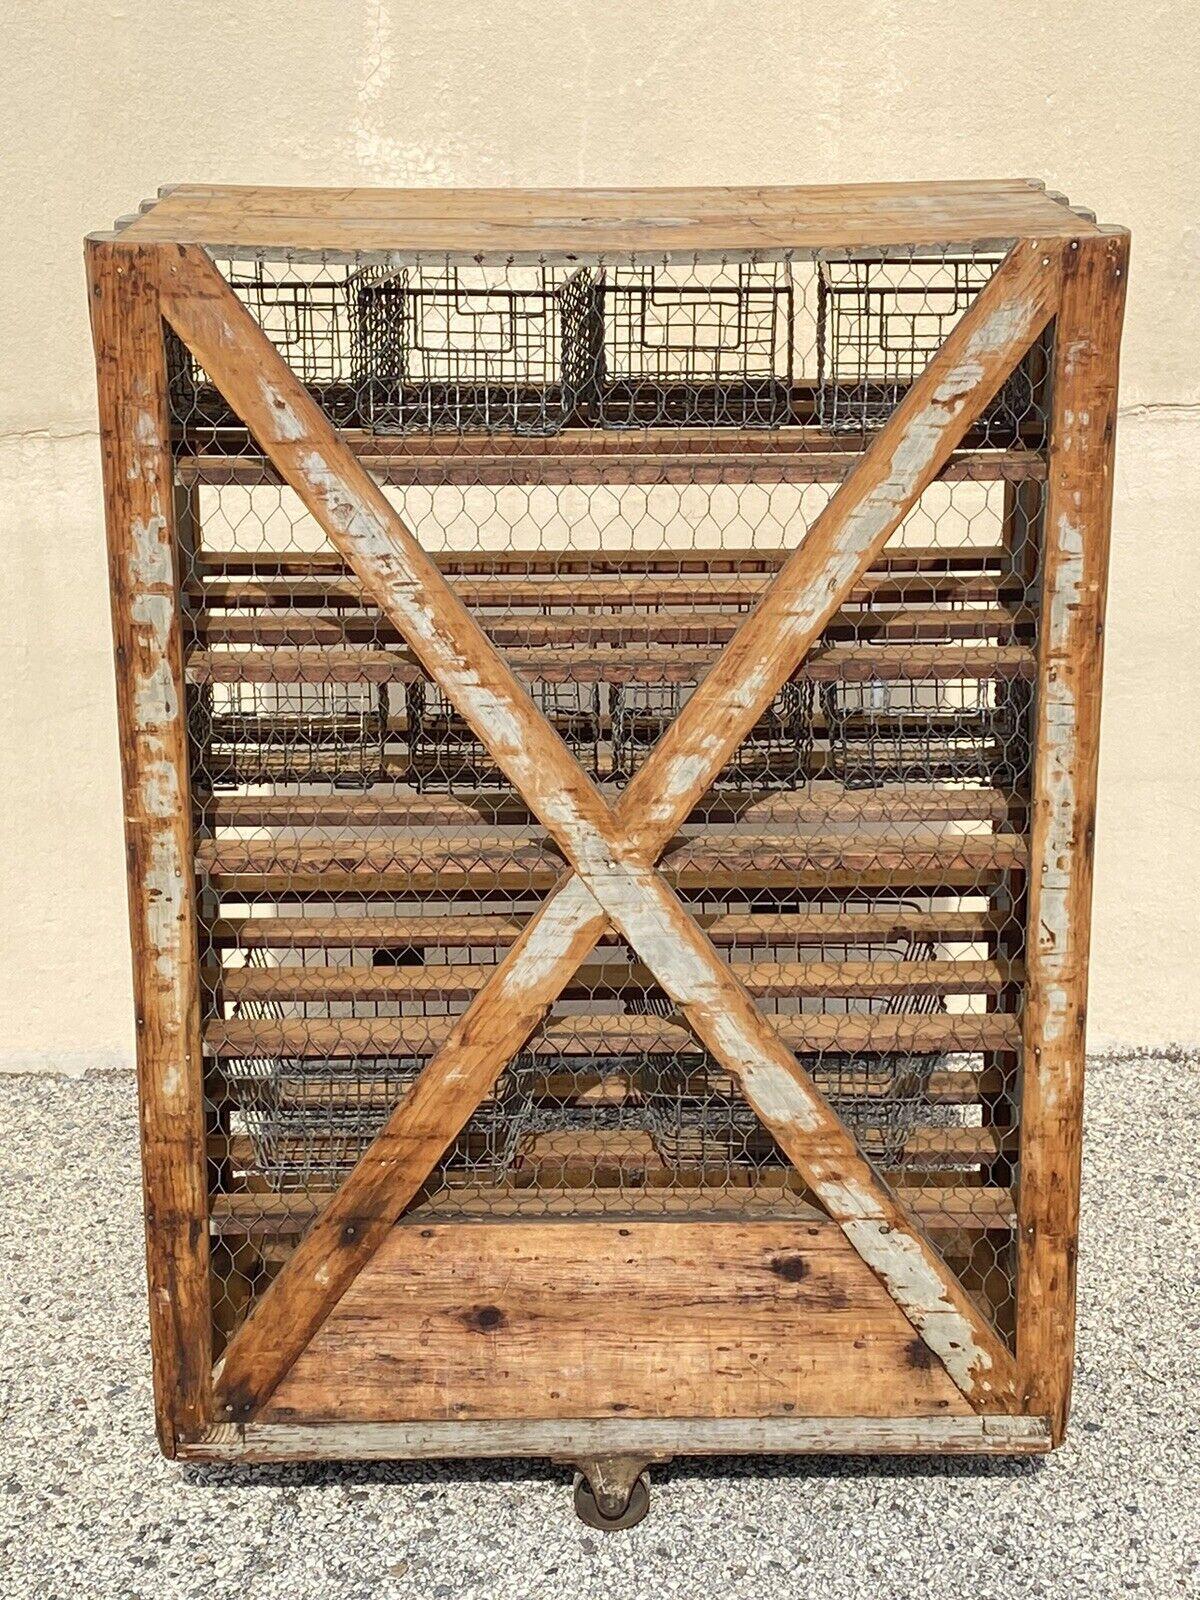 Antique American Industrial Wooden Rolling Shelf Storage Cart Distressed Gray For Sale 3